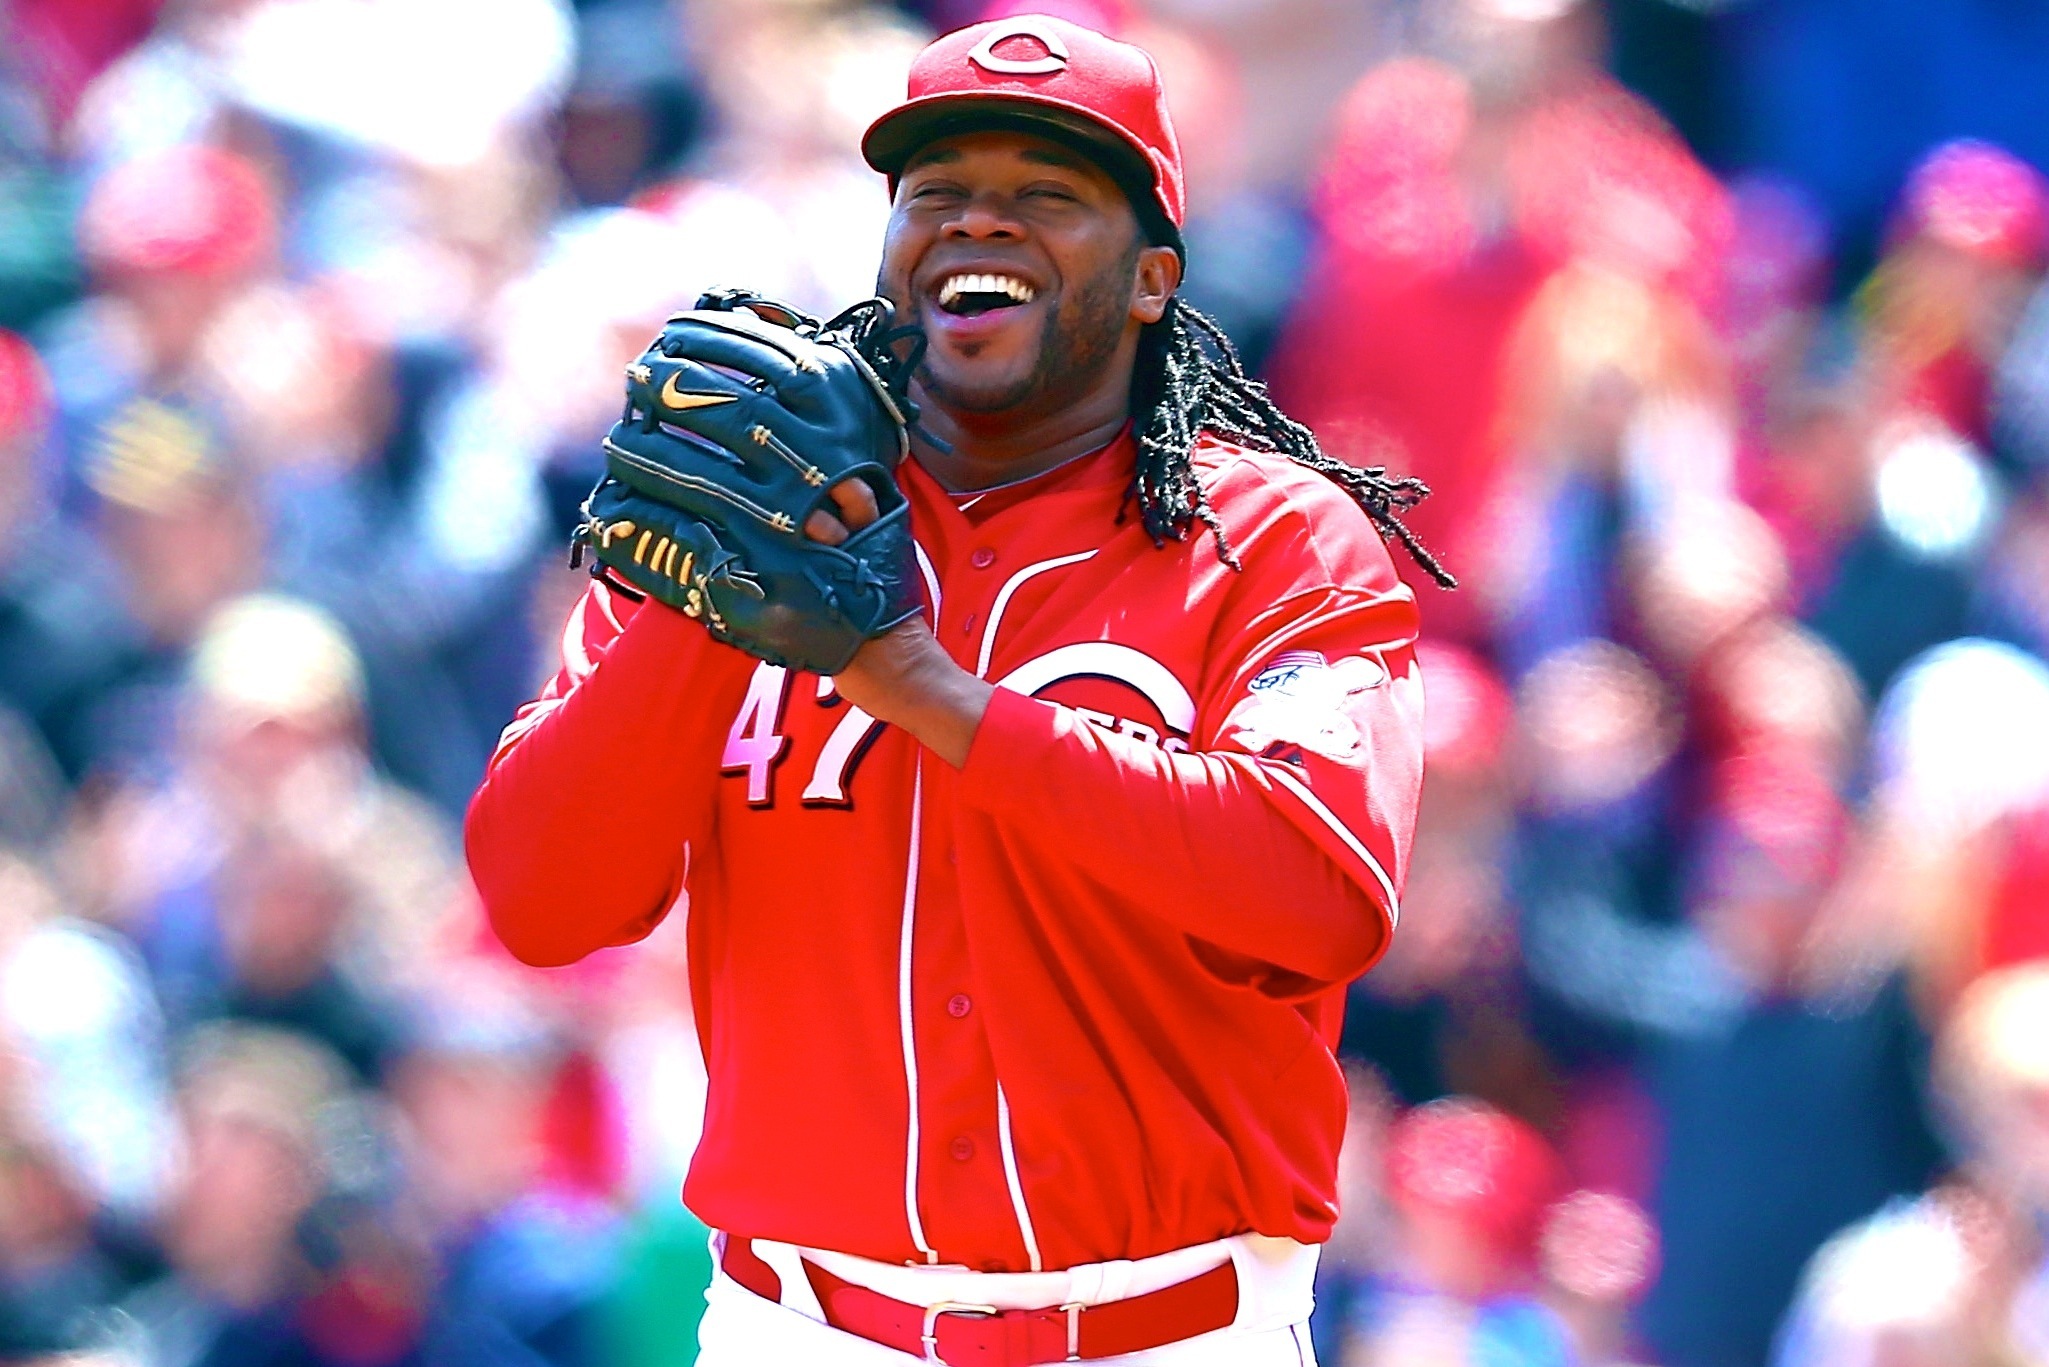 Reds' Johnny Cueto Continues Dominance With Shutout of Padres